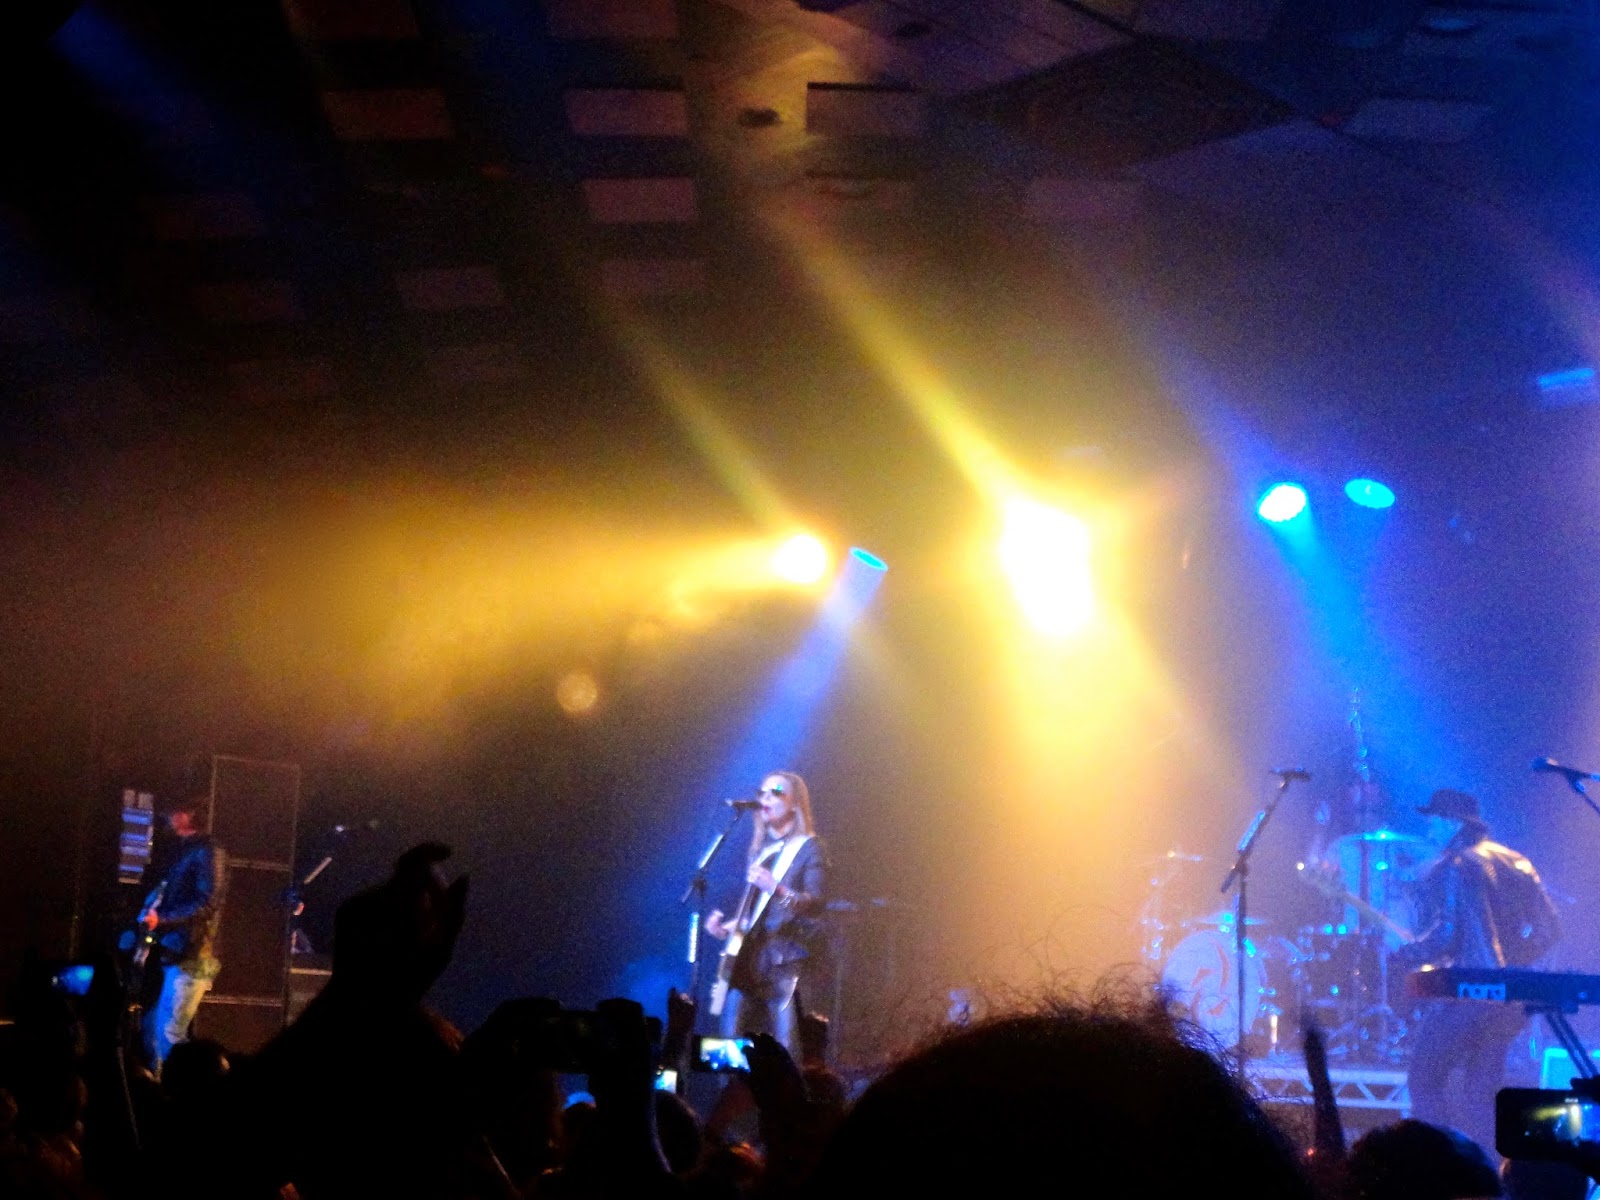 Halestorm performing live at the Glasgow Barrowlands